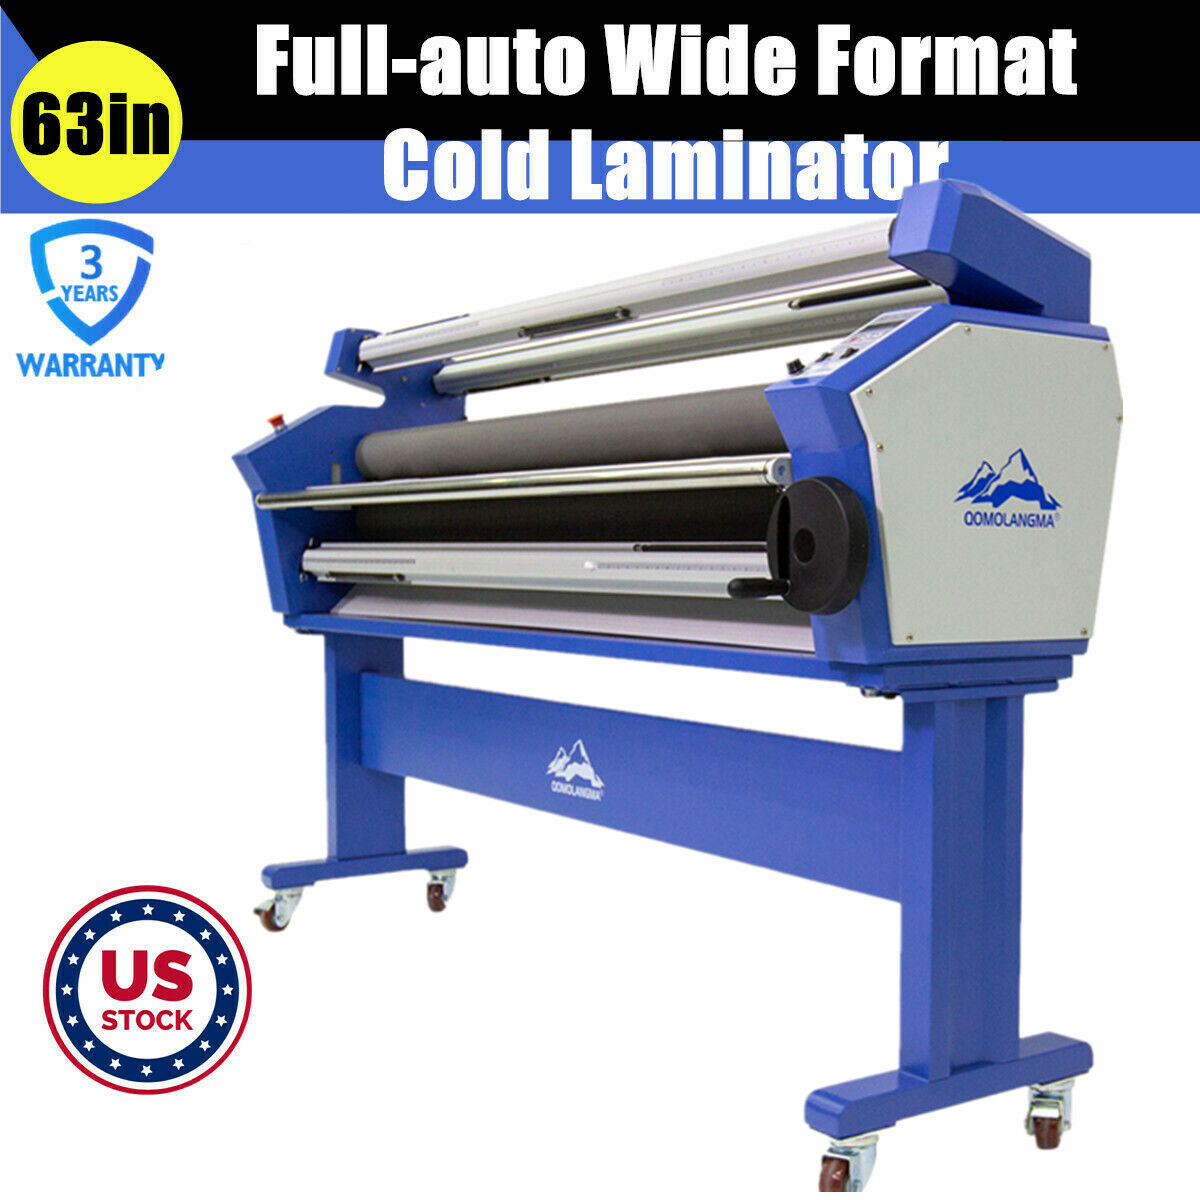 US Stock QOMOLANGMA 63in Full-auto Wide Format Cold Laminator with Heat Assisted